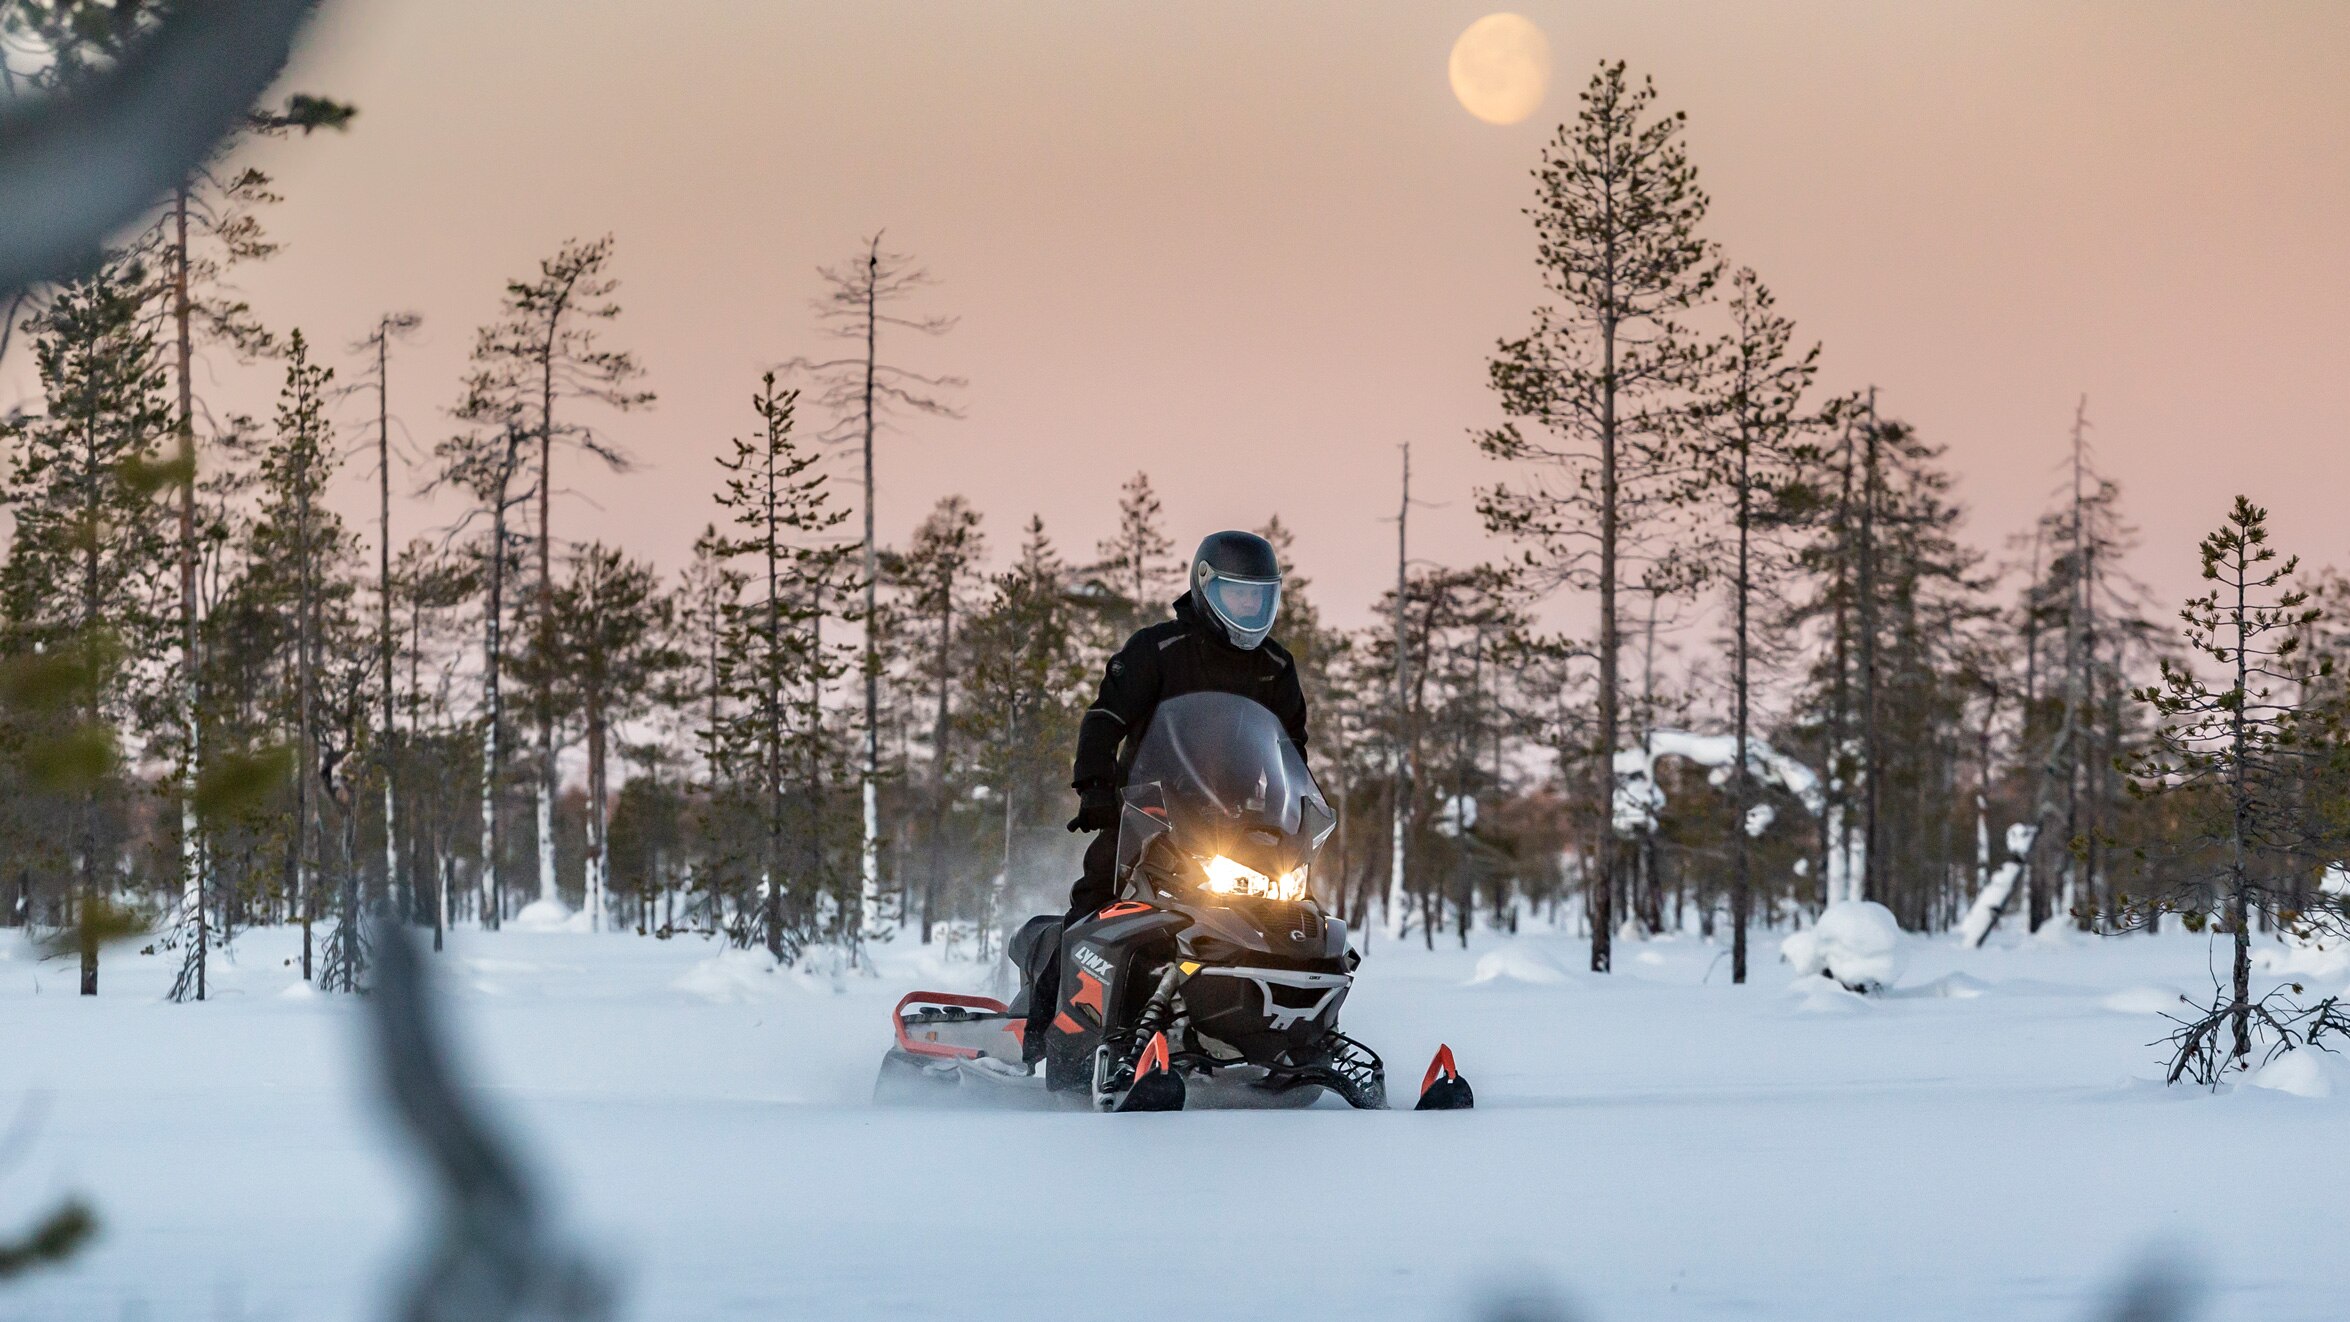 49 Ranger PRO snowmobile riding in snowy forest